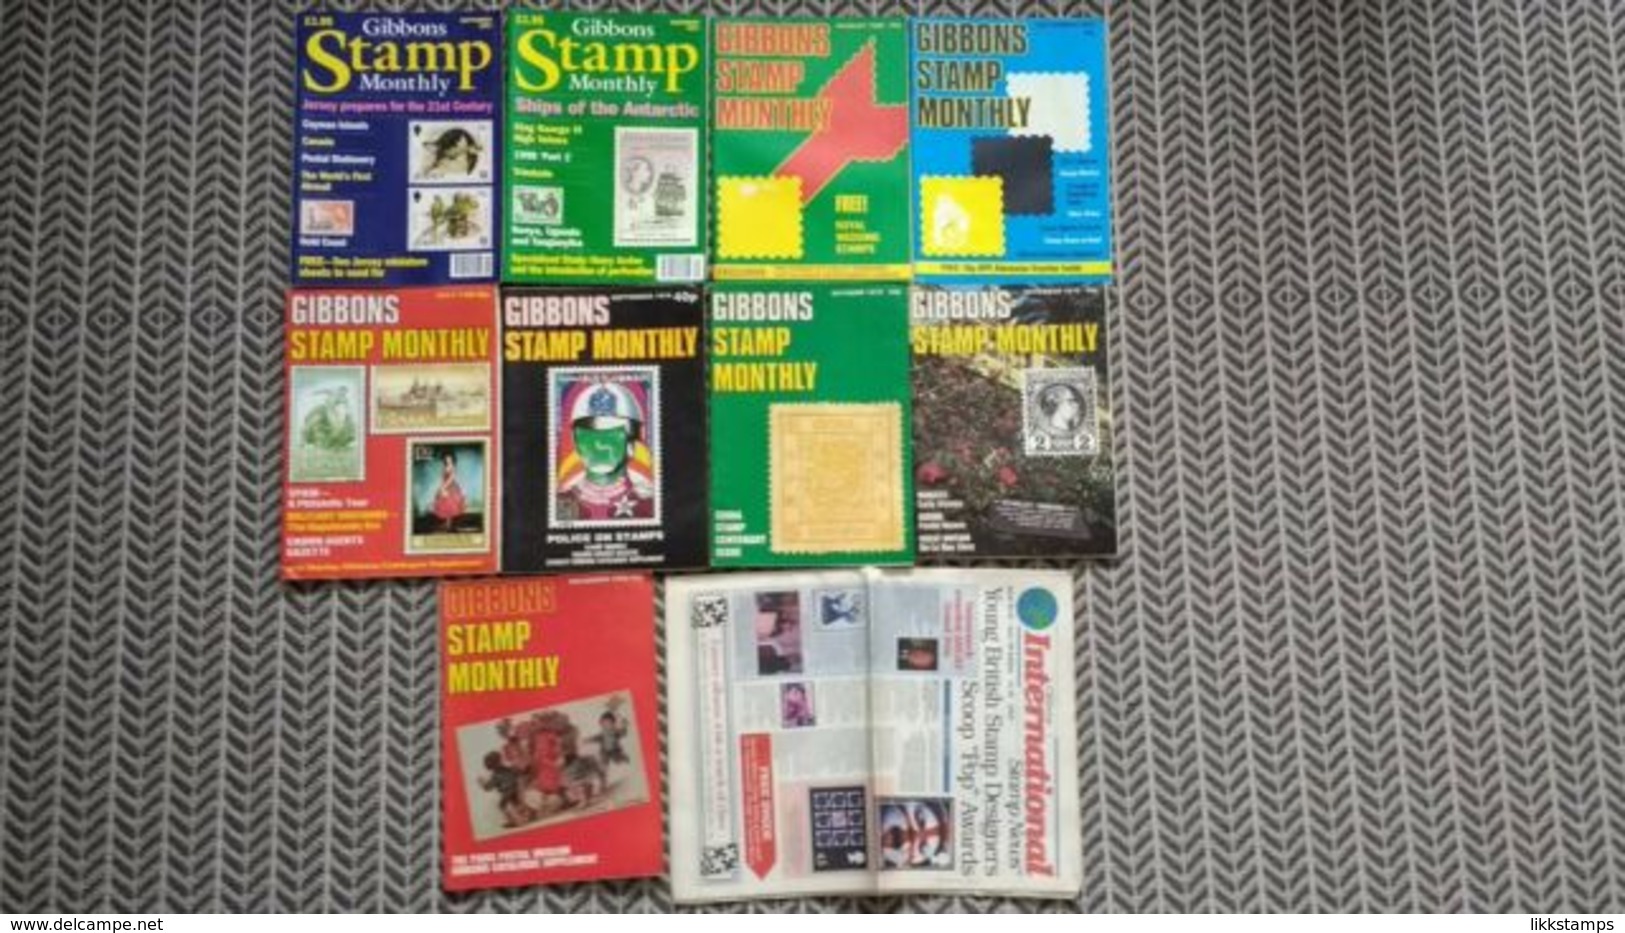 GIBBONS STAMP MONTHLY 1978/1980/1981/1997 VARIOUS ISSUES + 1 STAMP NEWS #L0009 (B6) - English (from 1941)